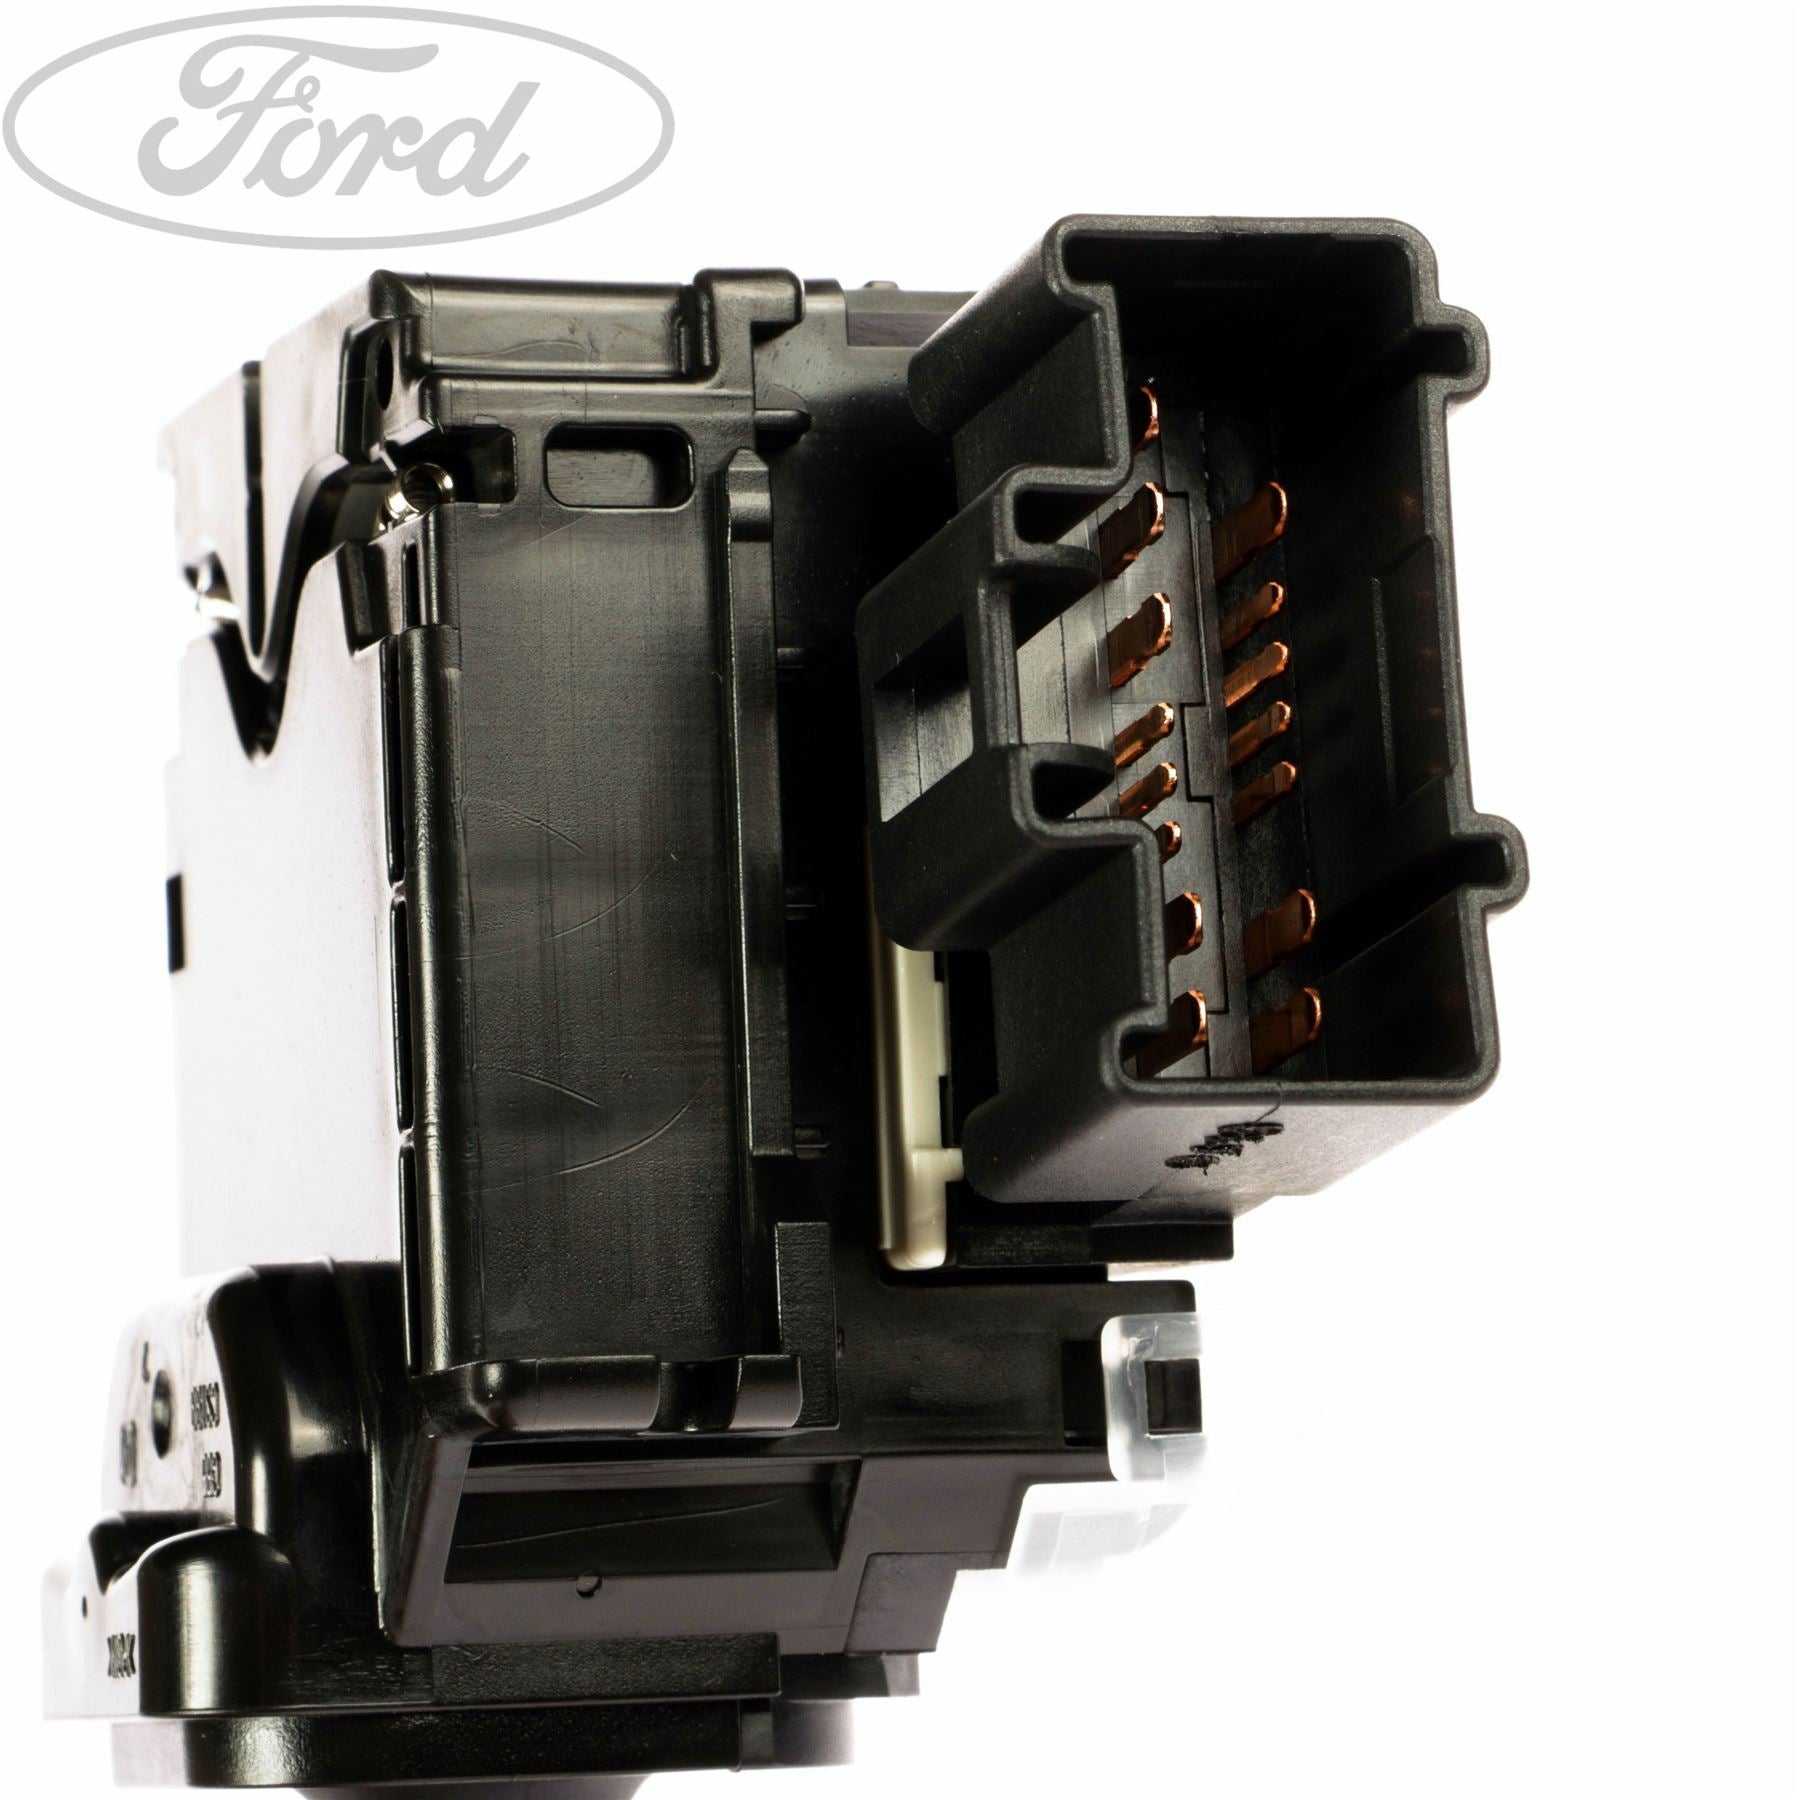 Ford, STEERING COLUMN CONTROLS